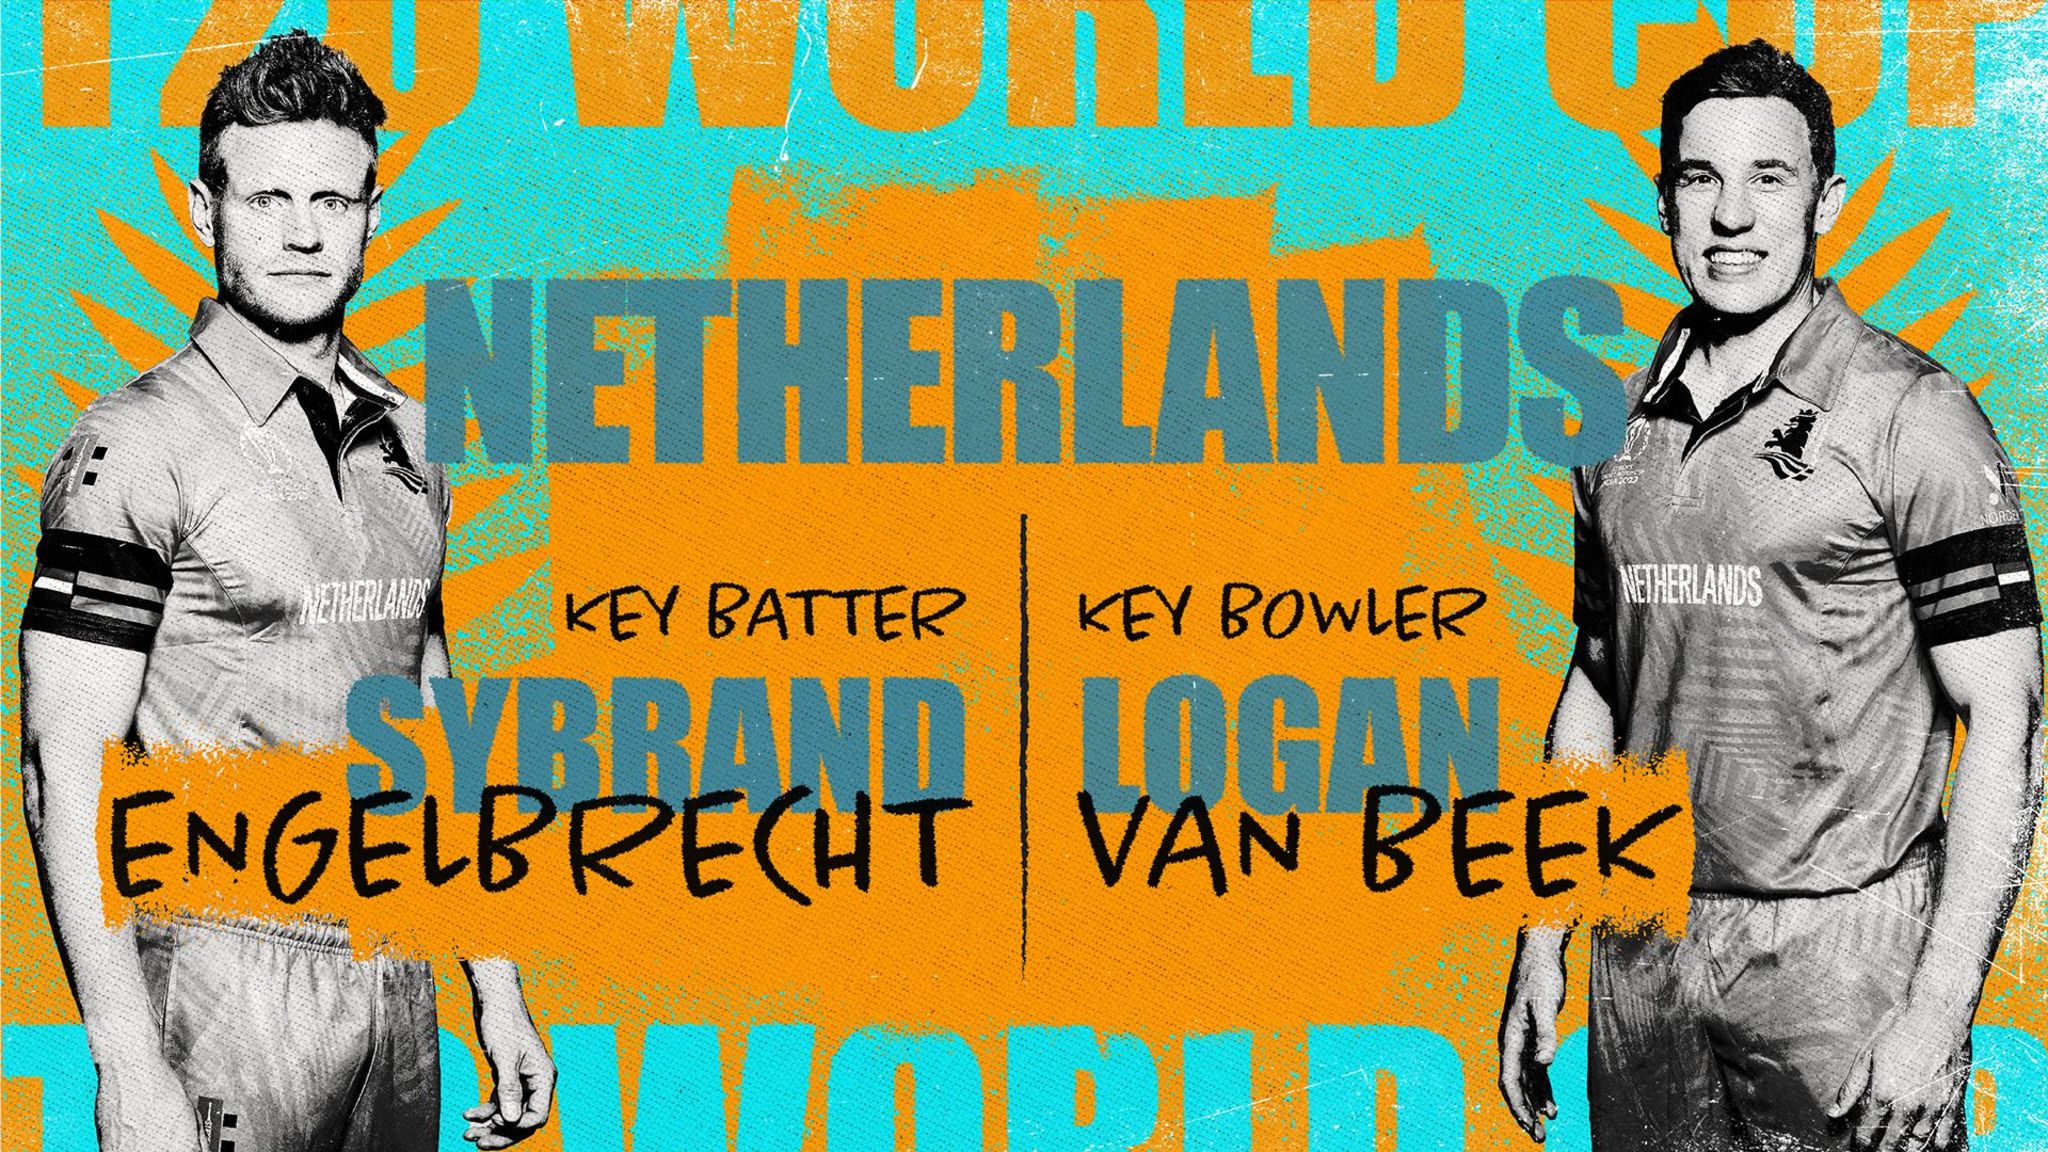 A graphic showing Sybrand Engelbrecht and Logan van Beek as Netherlands' key batter and bowler at the Men's T20 World Cup